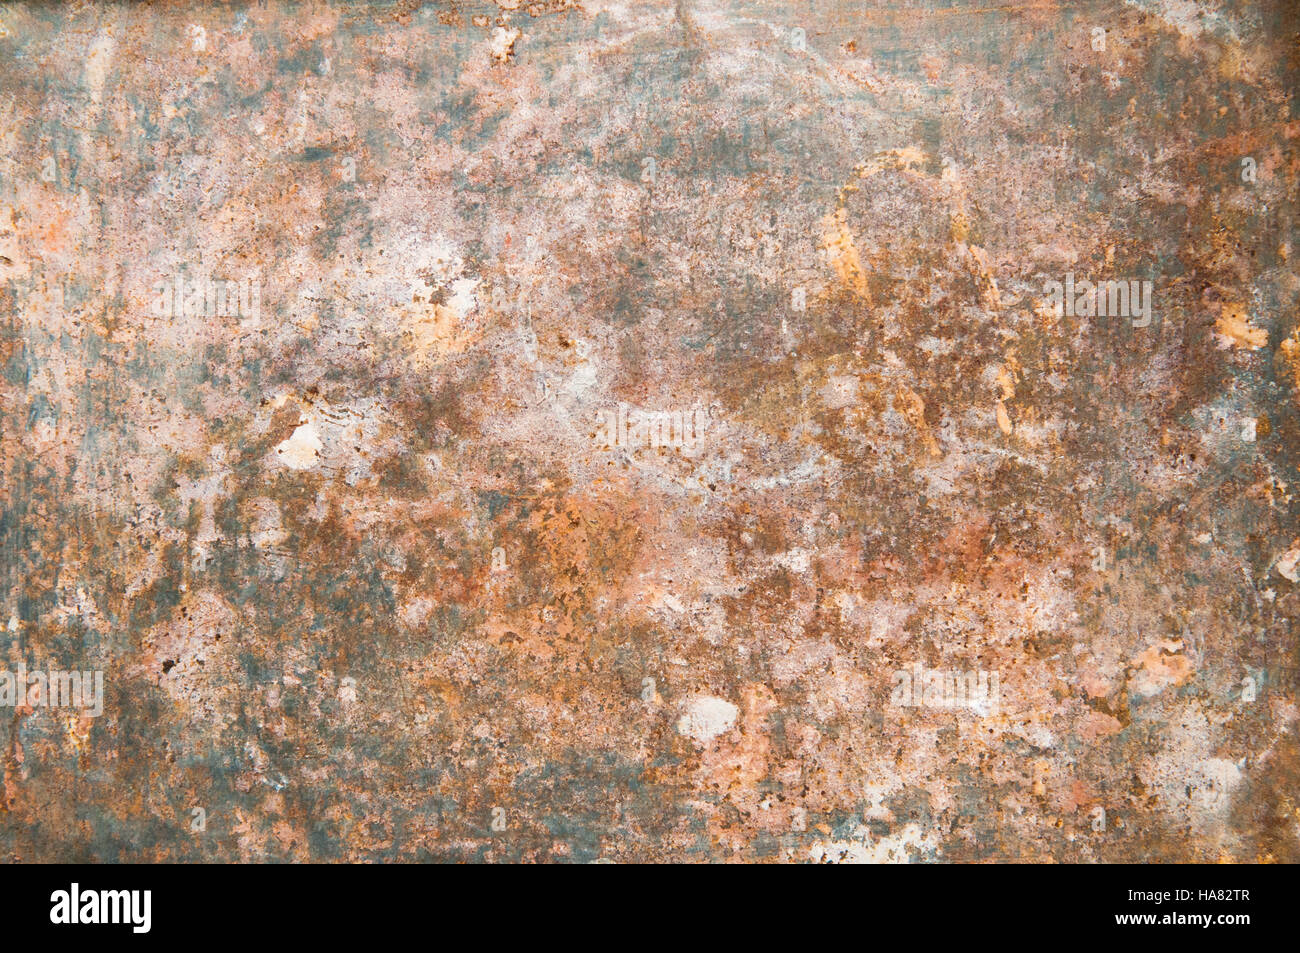 Rusty metal texture from a rusted sheet of material Stock Photo